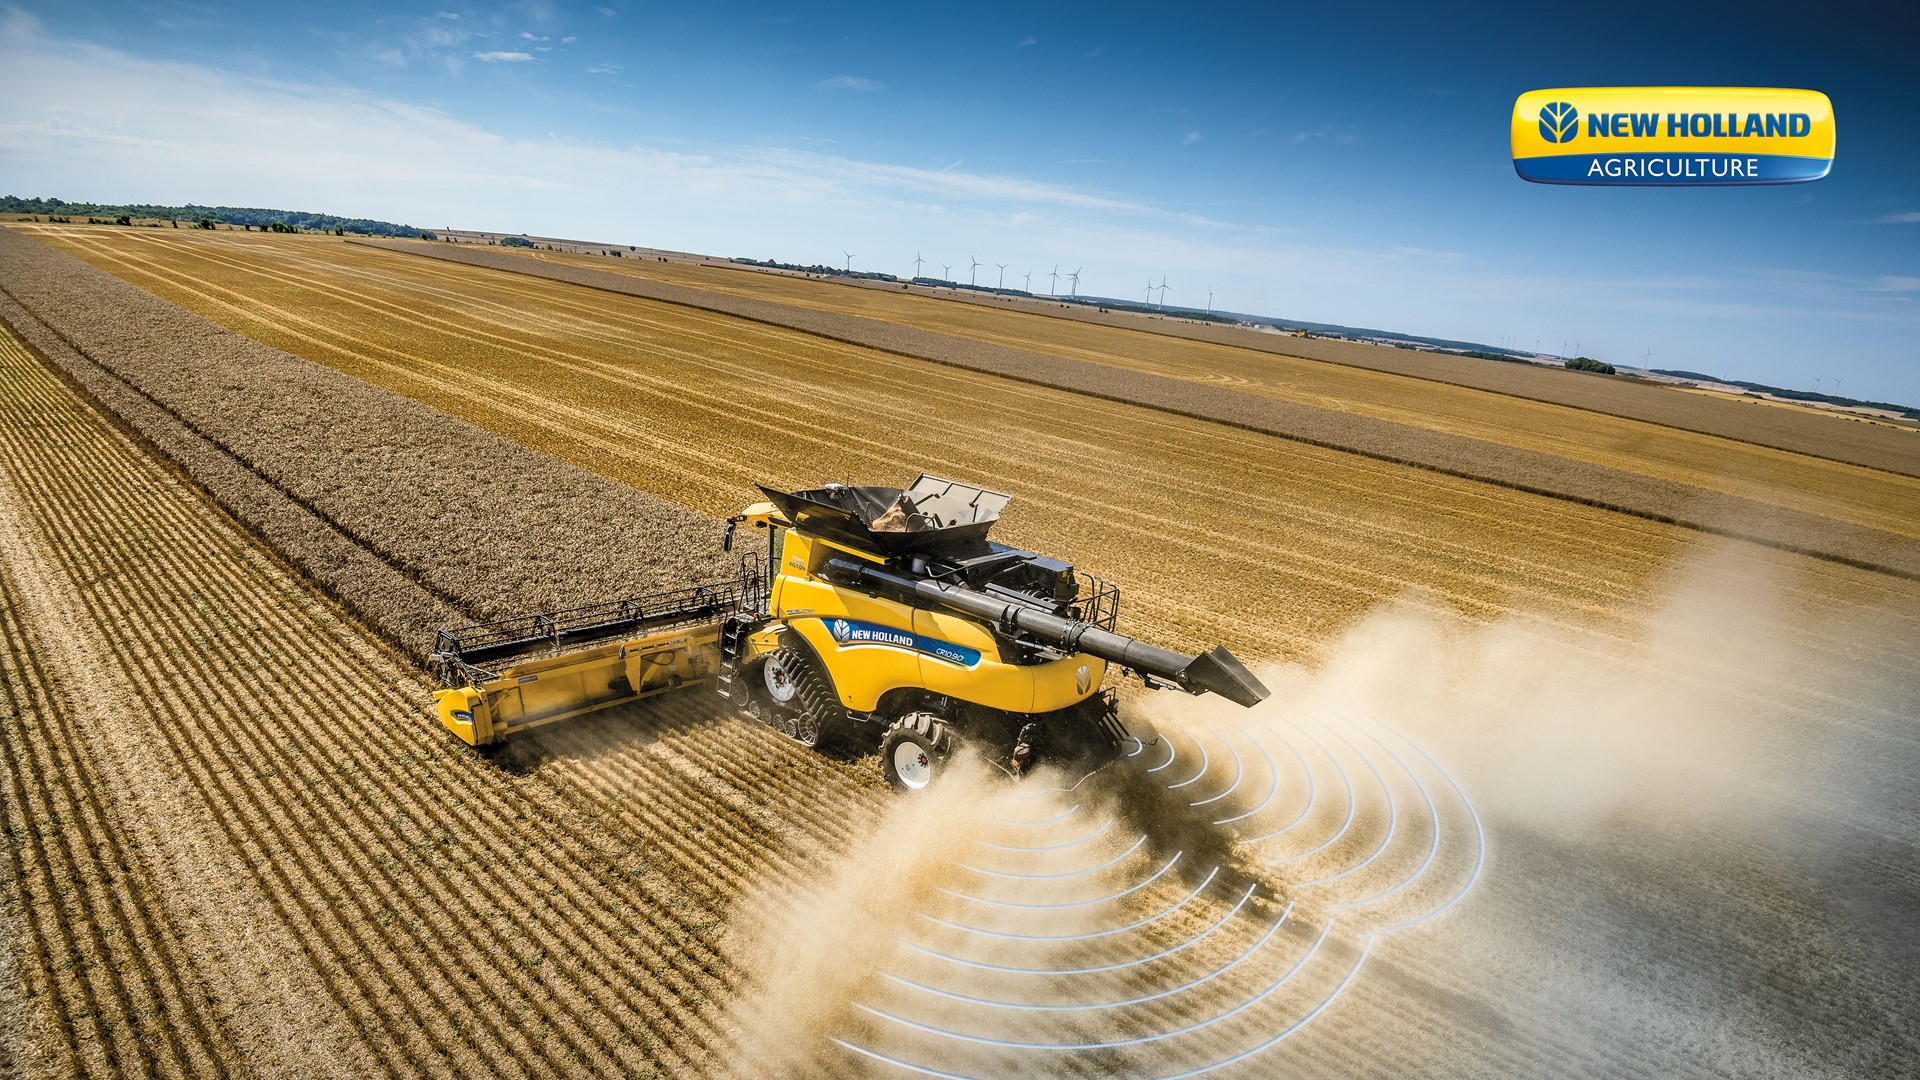 New Holland’s new combine residue automation system uses 2D radars